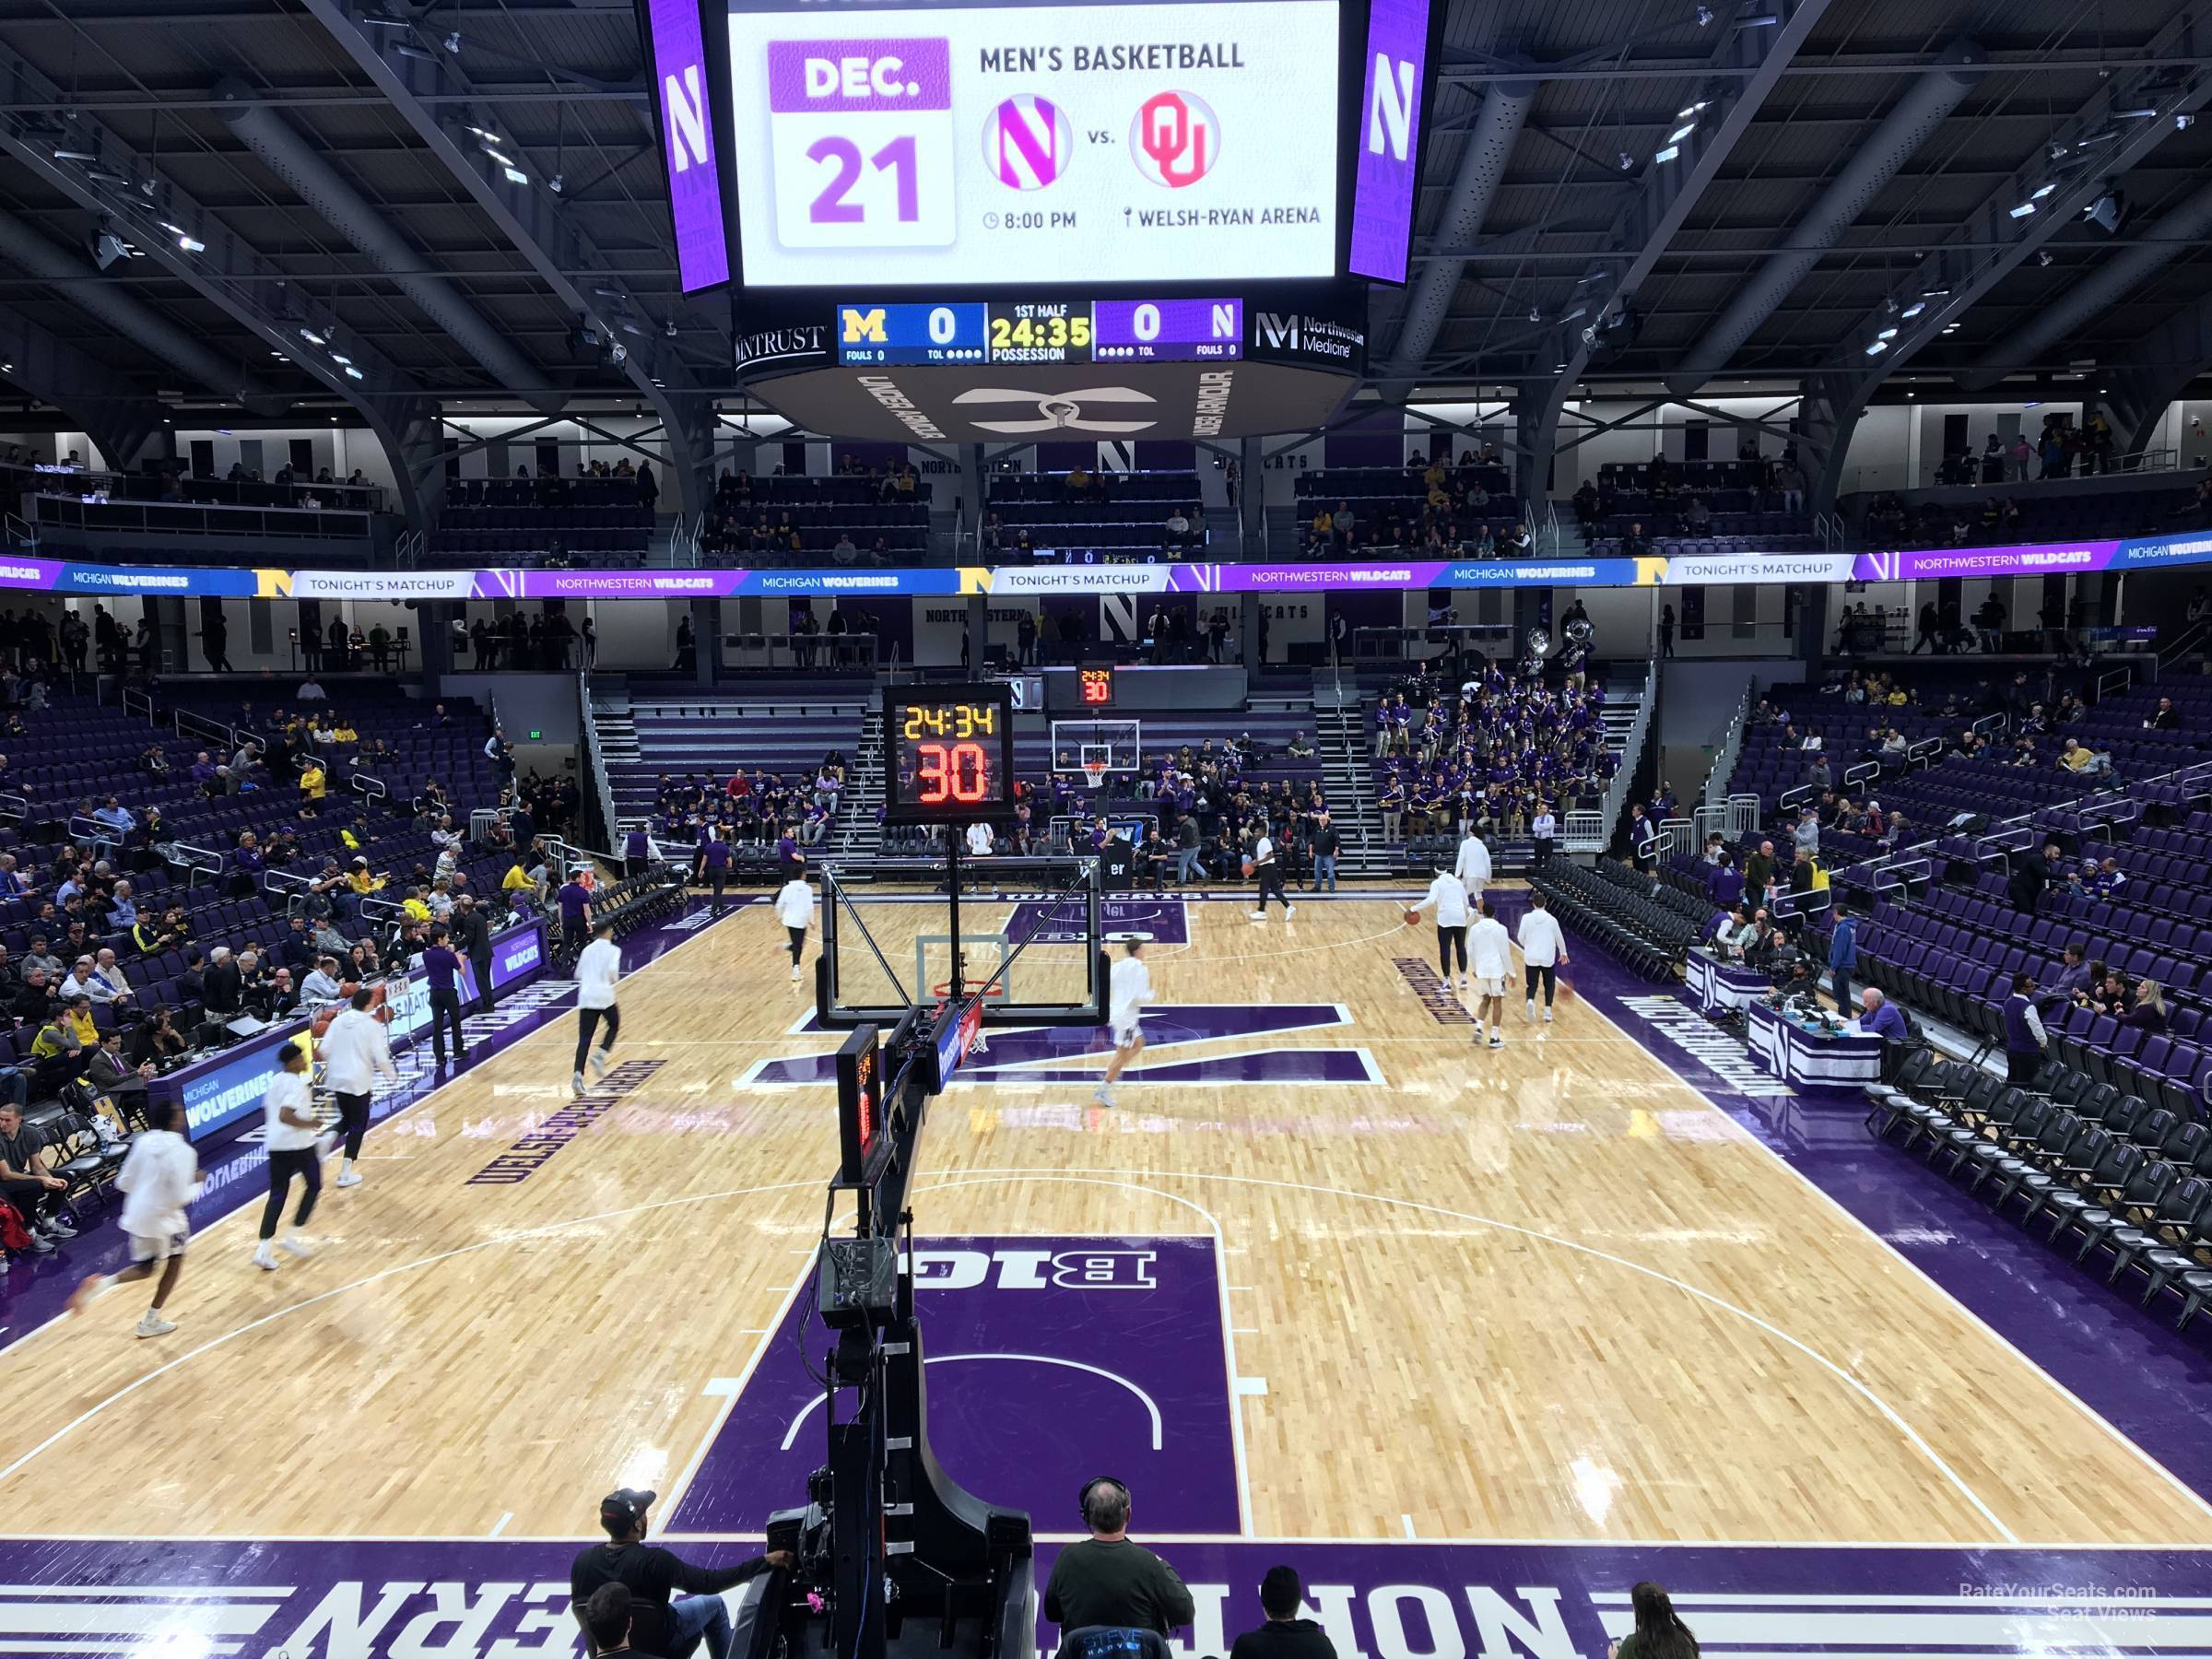 section 104, row 12 seat view  - welsh-ryan arena